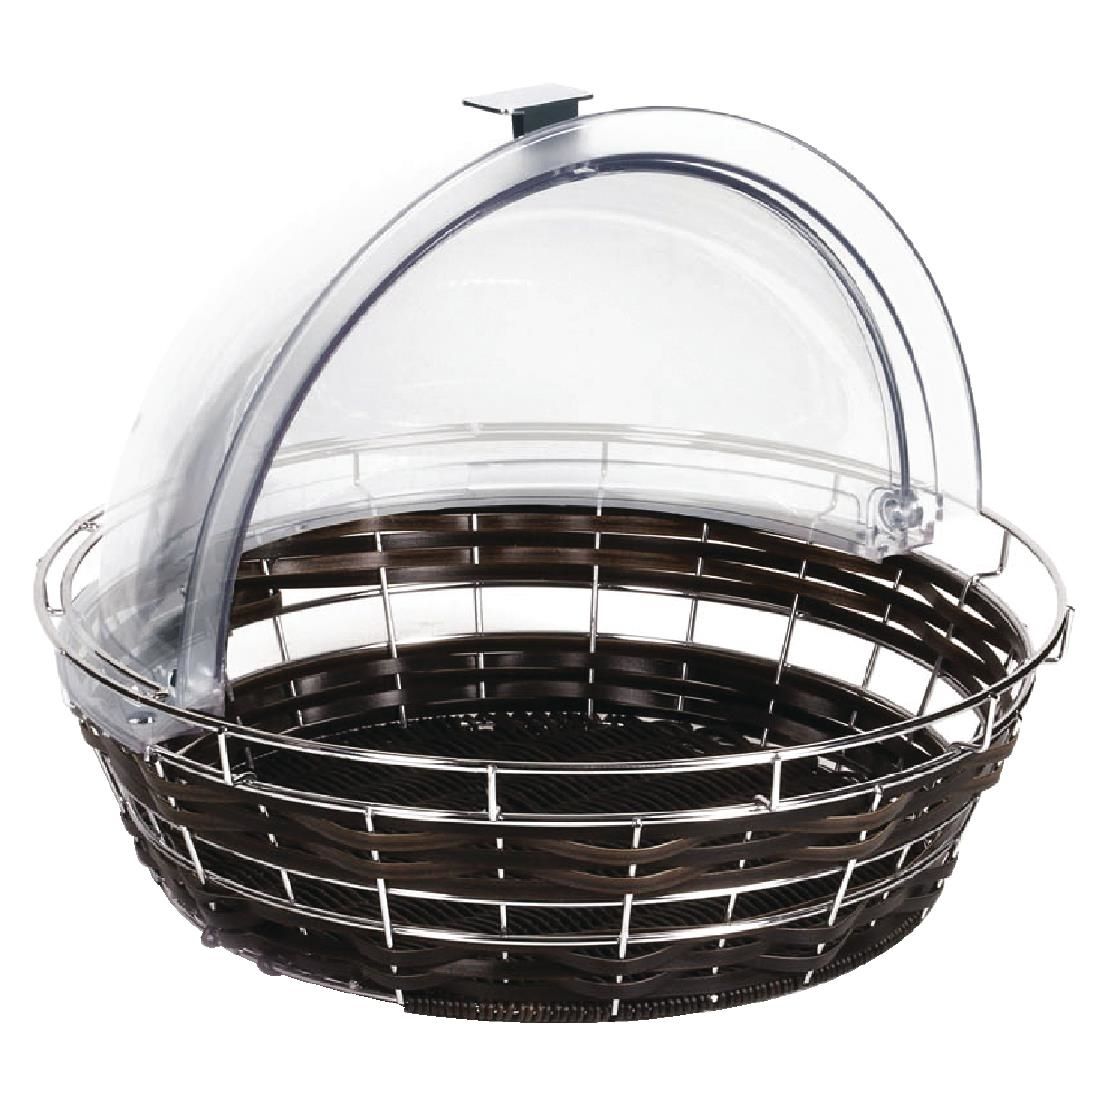 GC946 APS Frames Polyratten Round Basket with Frame JD Catering Equipment Solutions Ltd